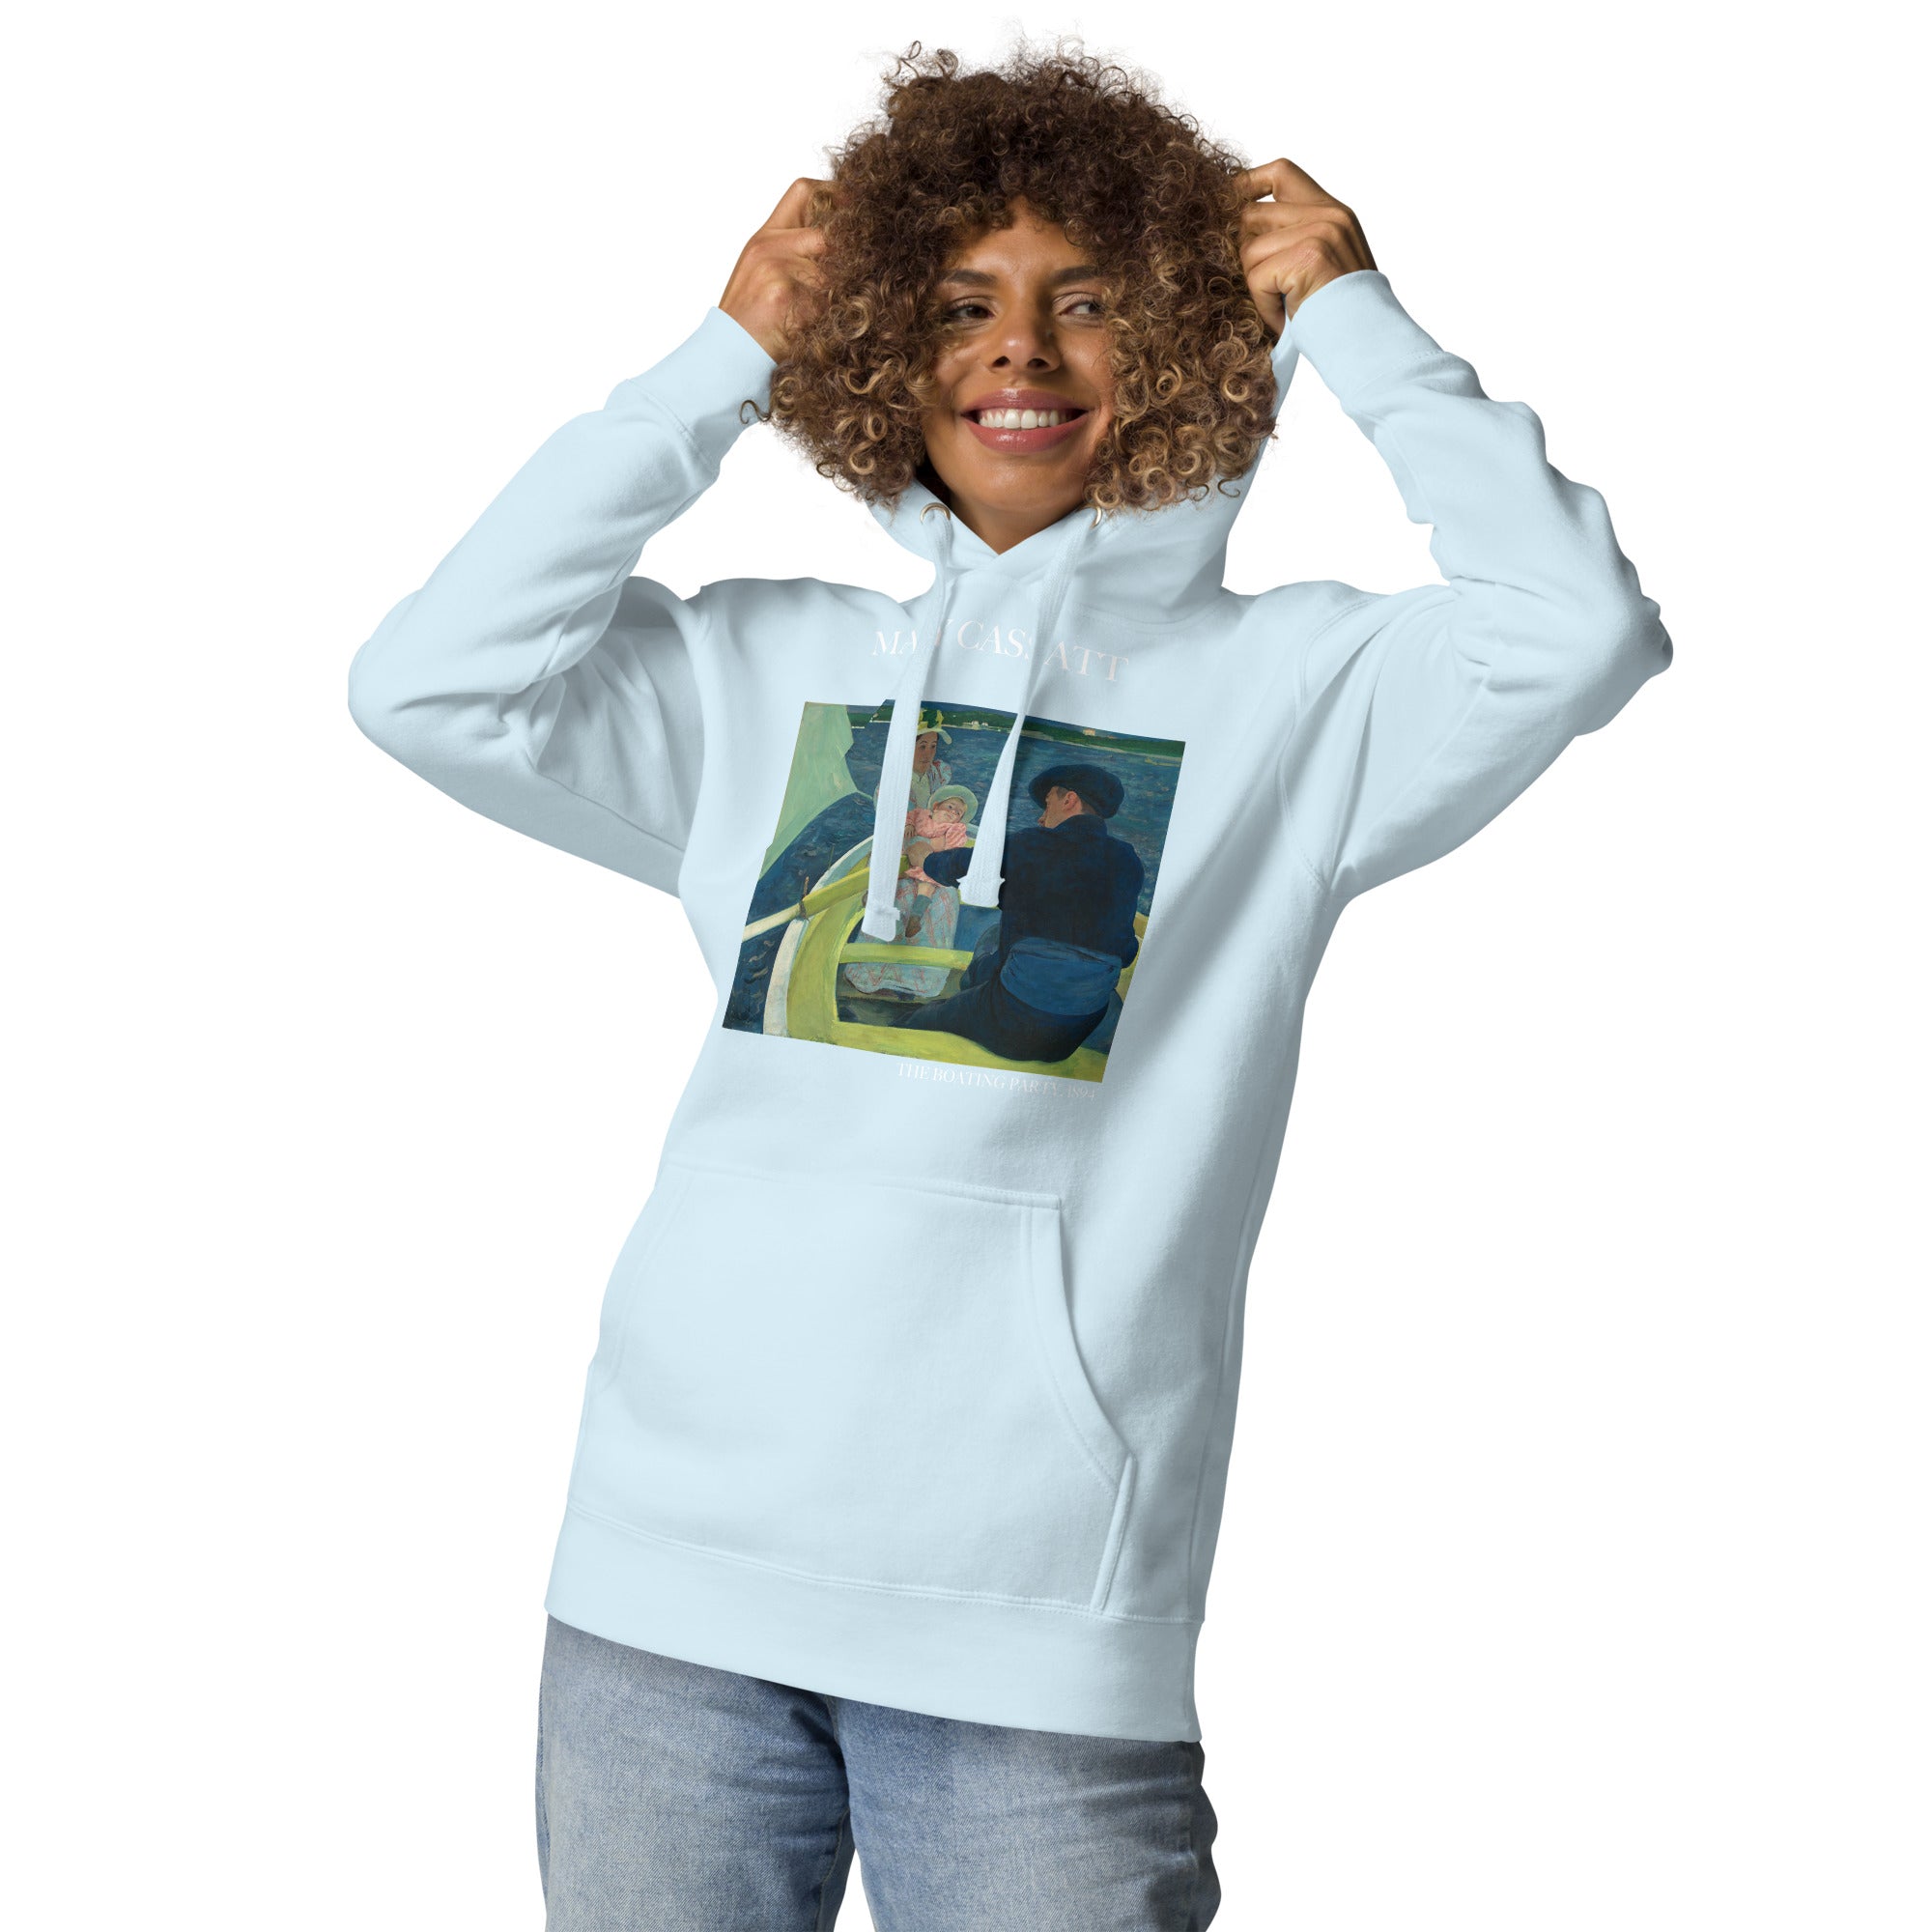 Mary Cassatt 'The Boating Party' Famous Painting Hoodie | Unisex Premium Art Hoodie